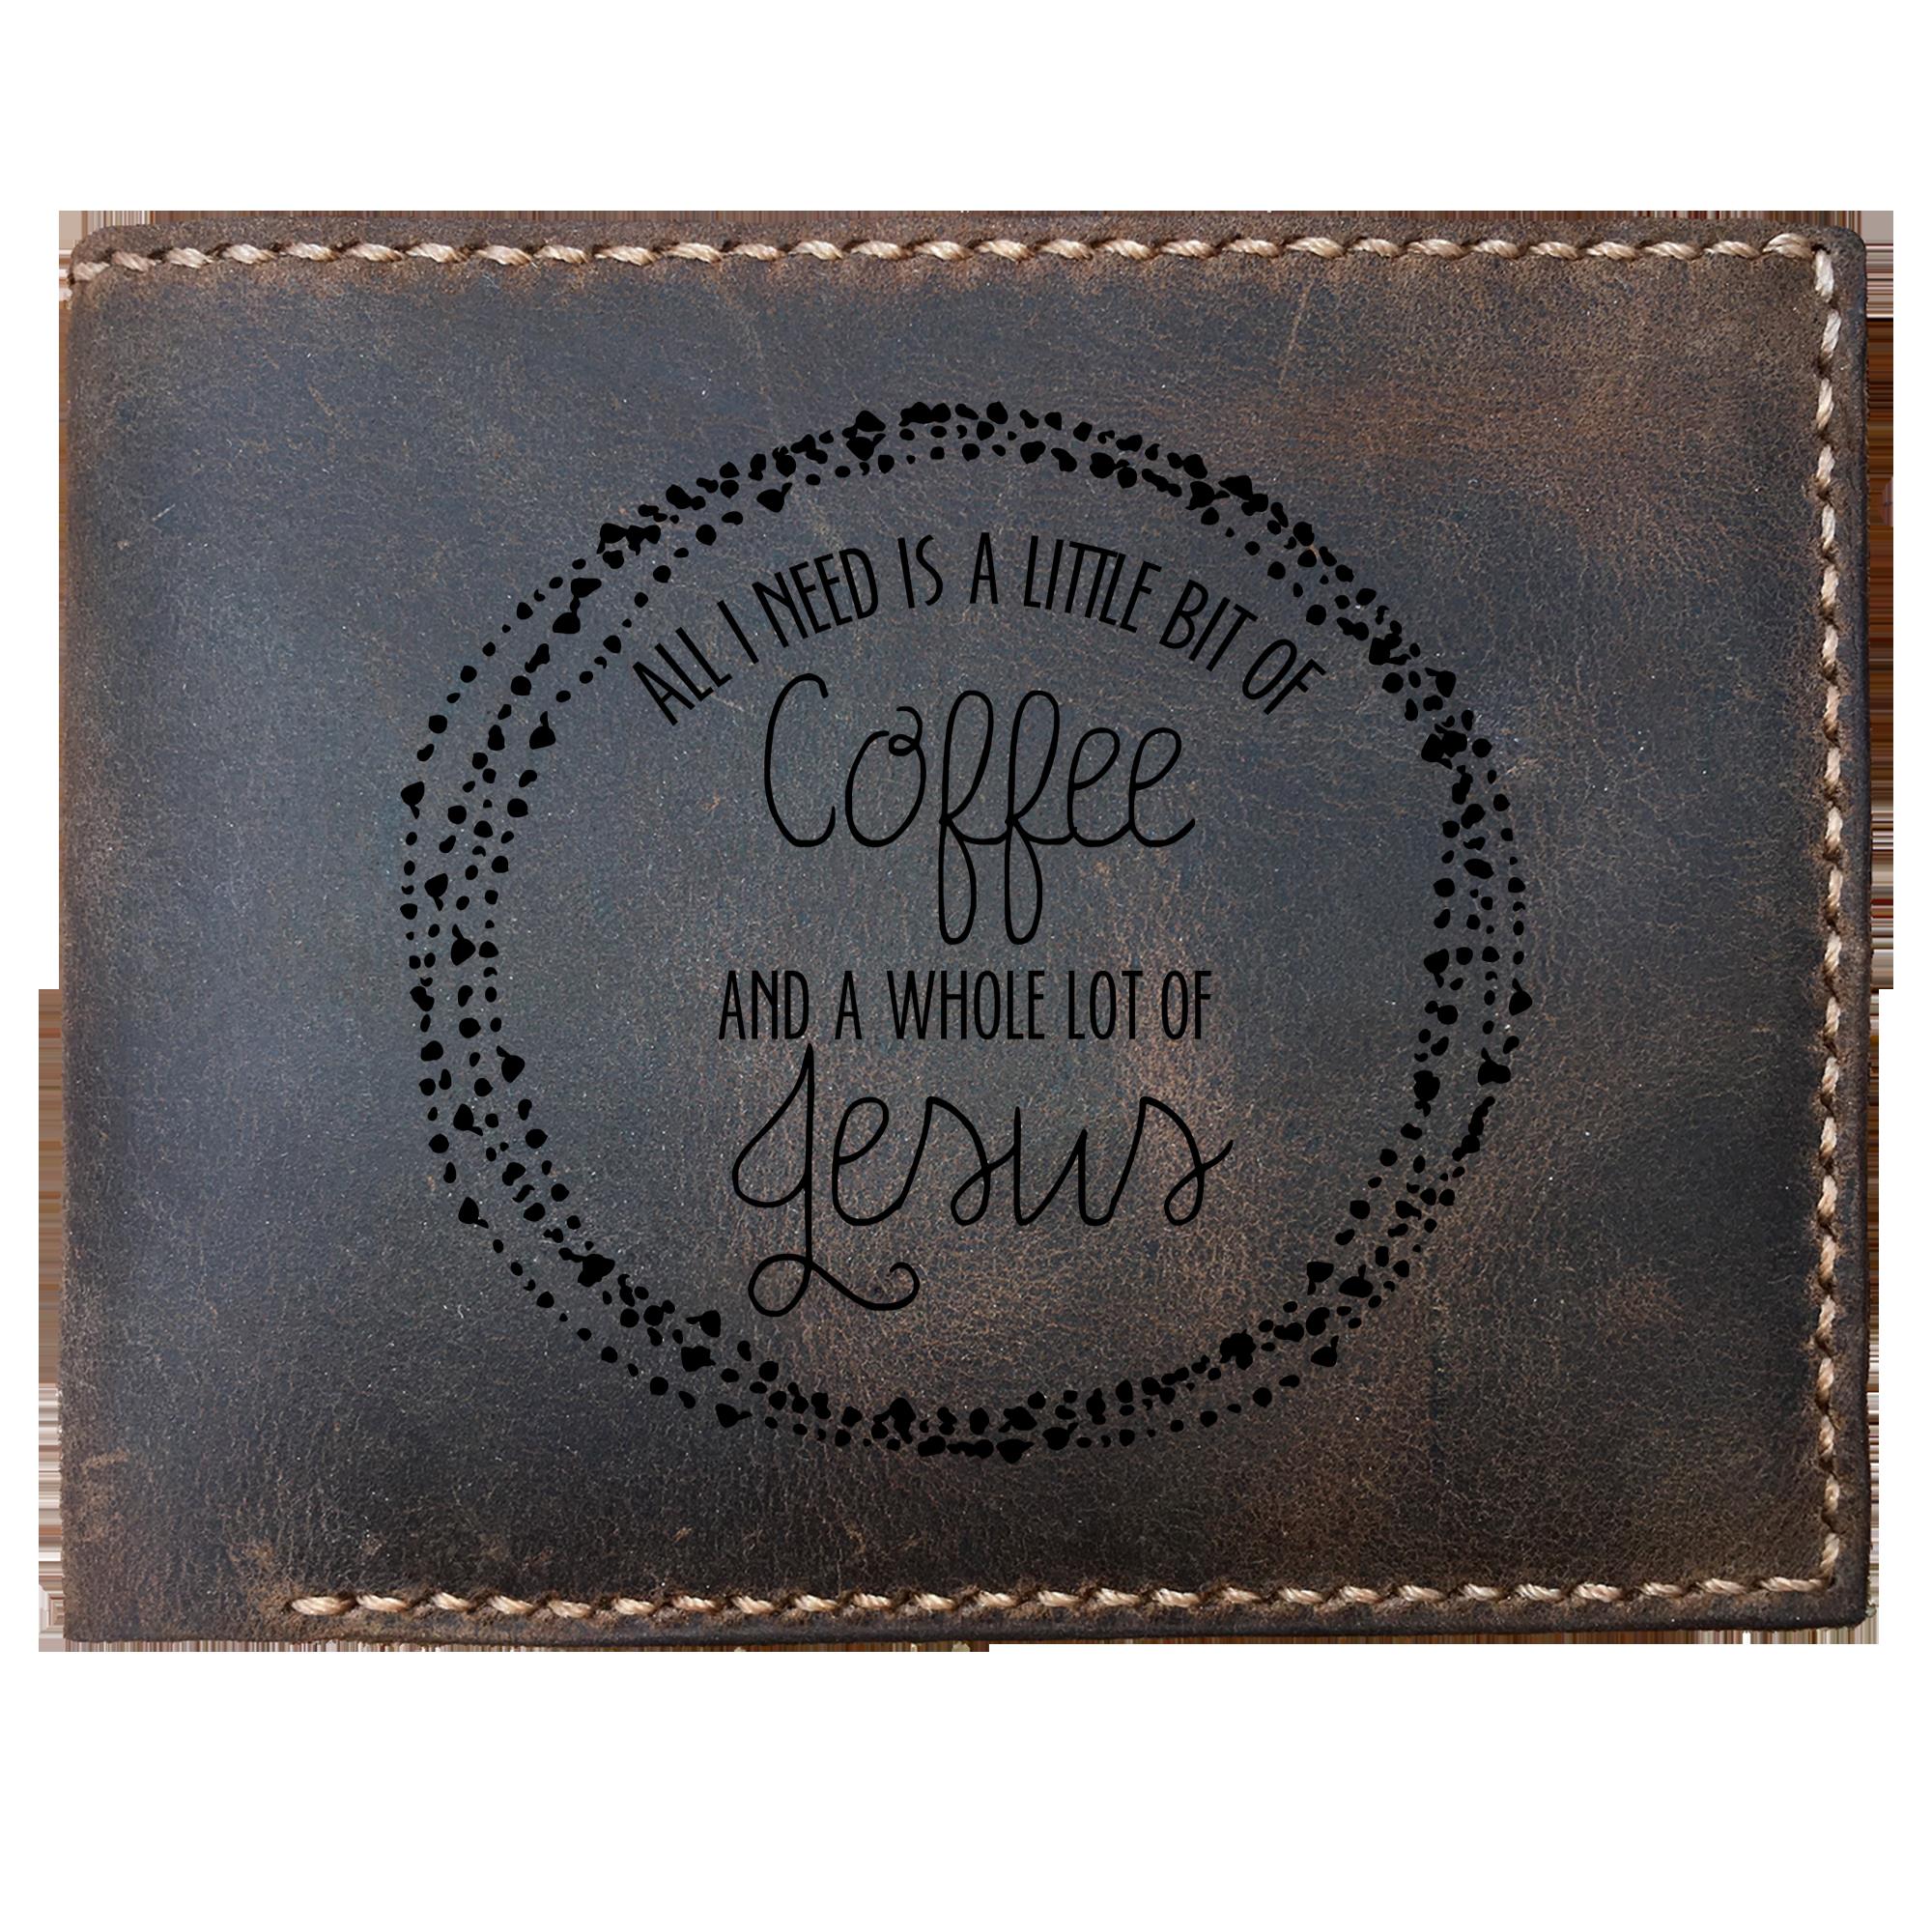 Skitongifts Funny Custom Laser Engraved Bifold Leather Wallet, Novelty Christian Themed. All I Need Is A Little Bit Of Coffee And A Whole Lot Of Jesus